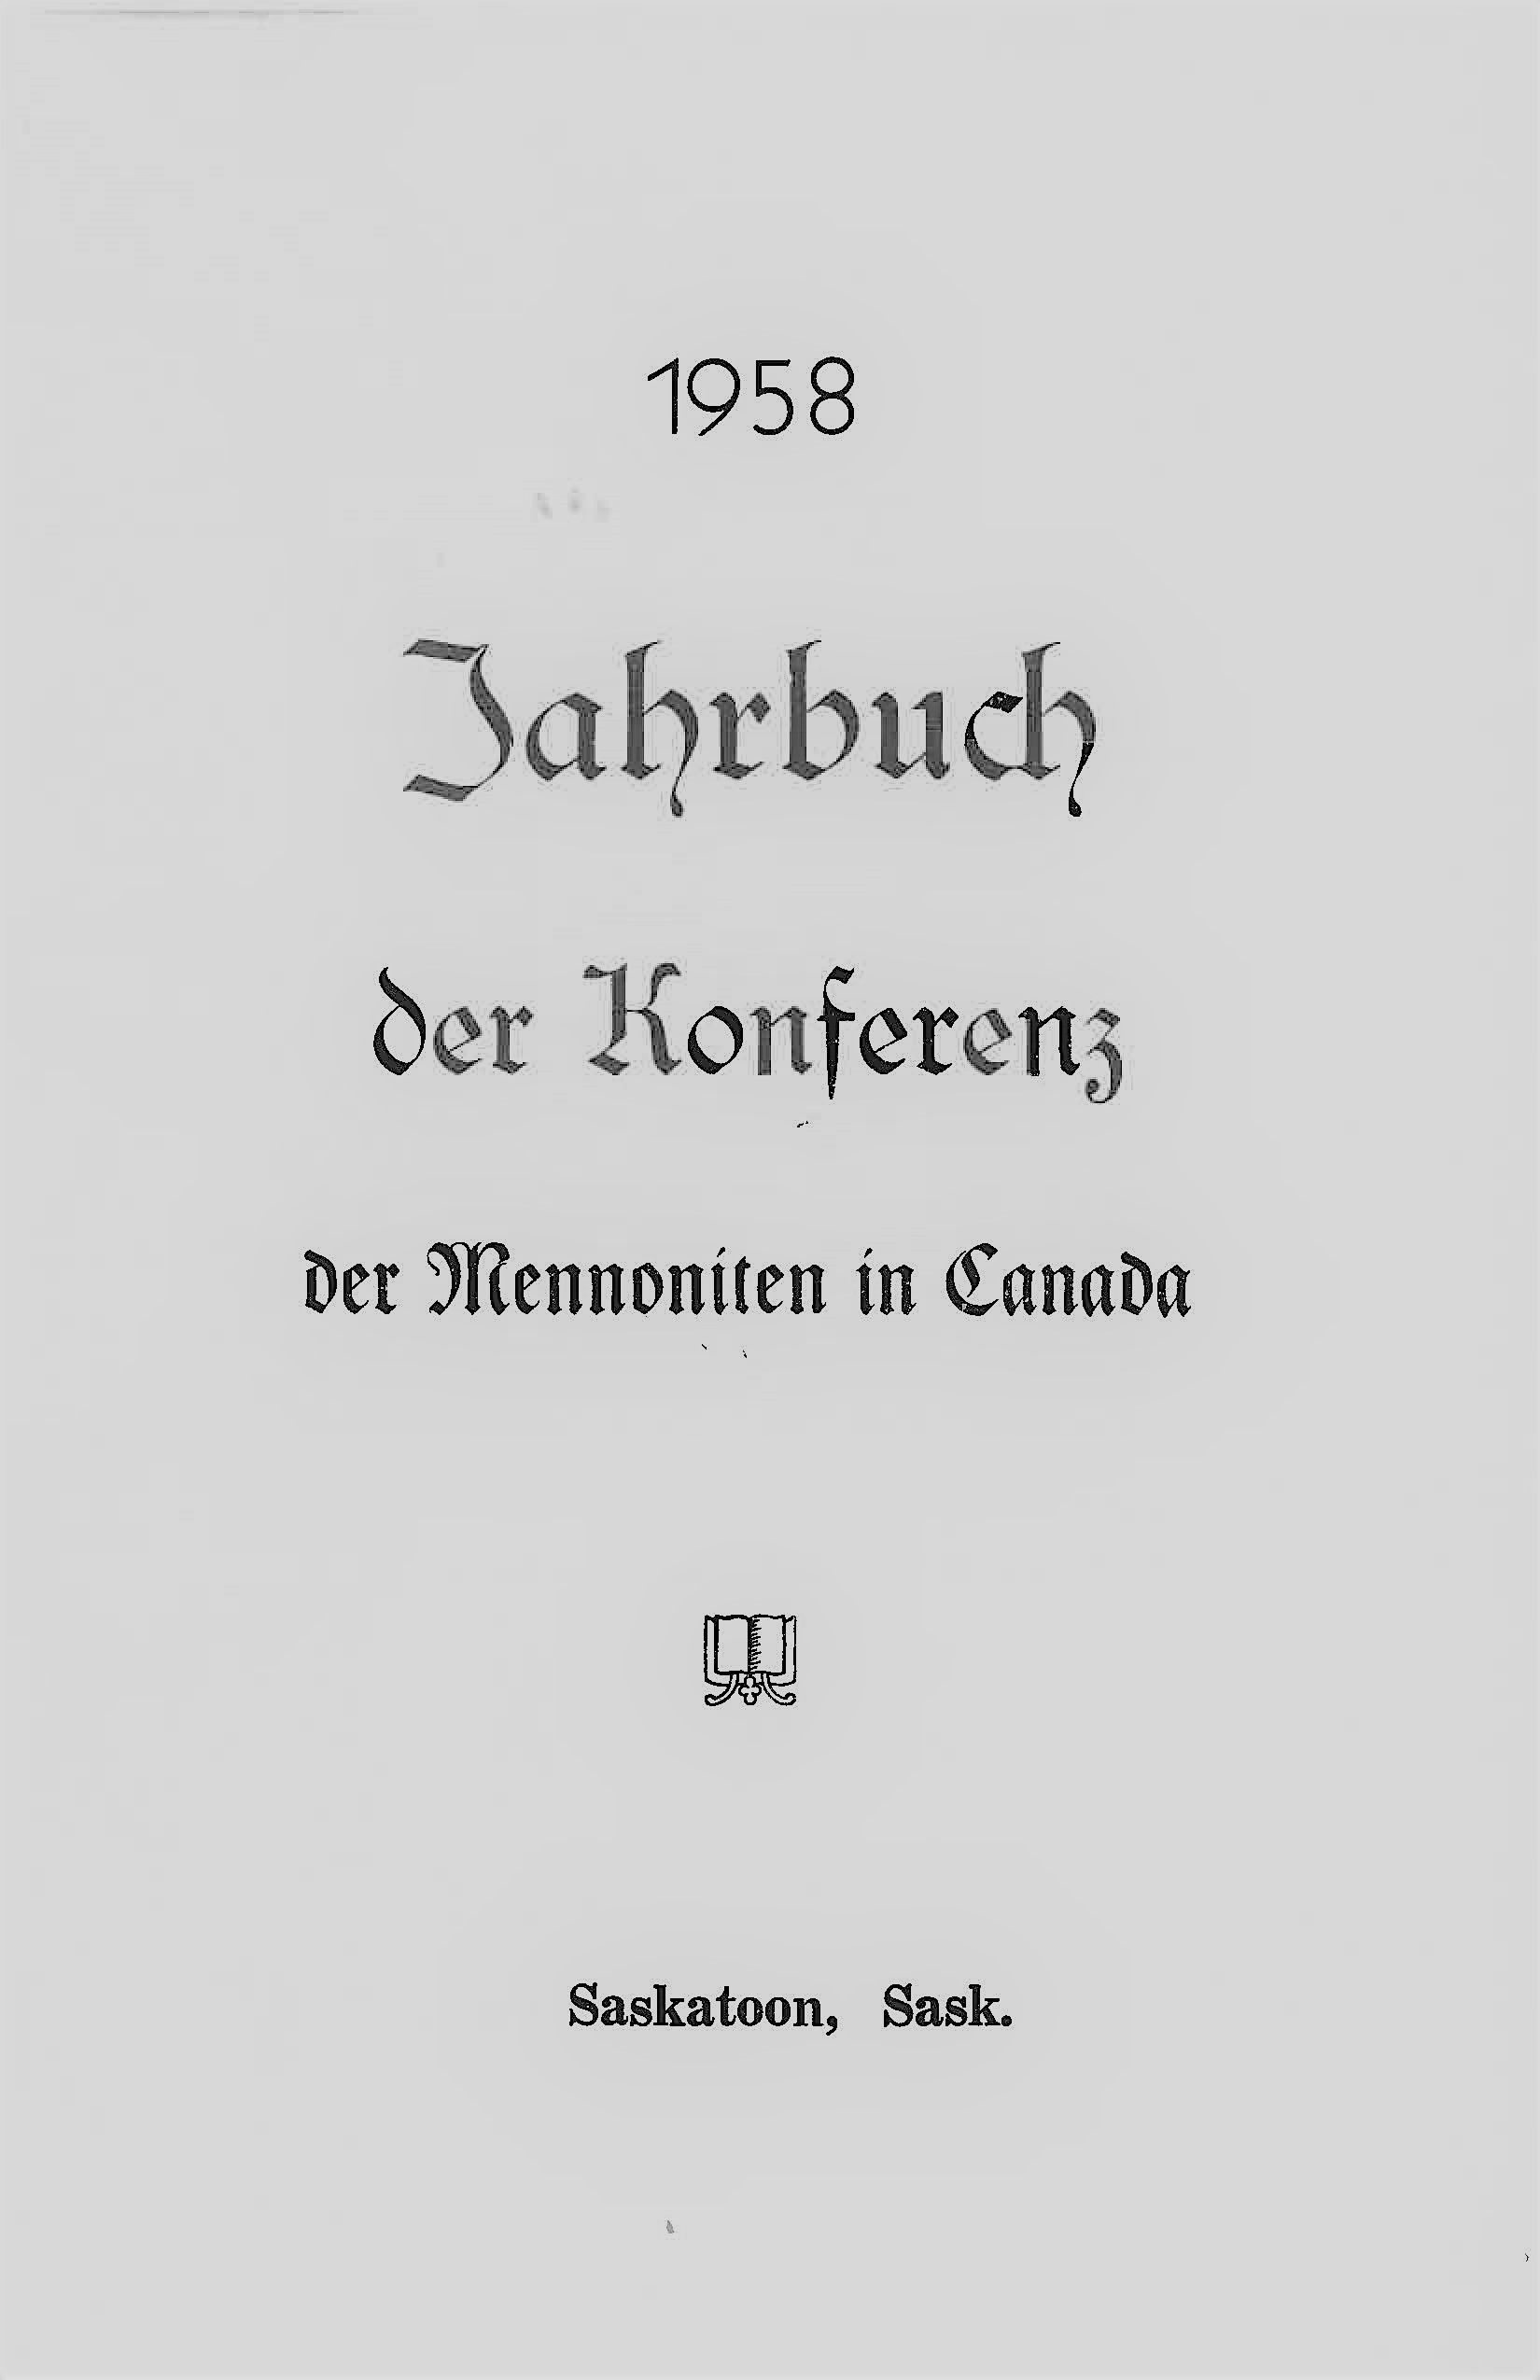 Title page of the CMC 1958 yearbook